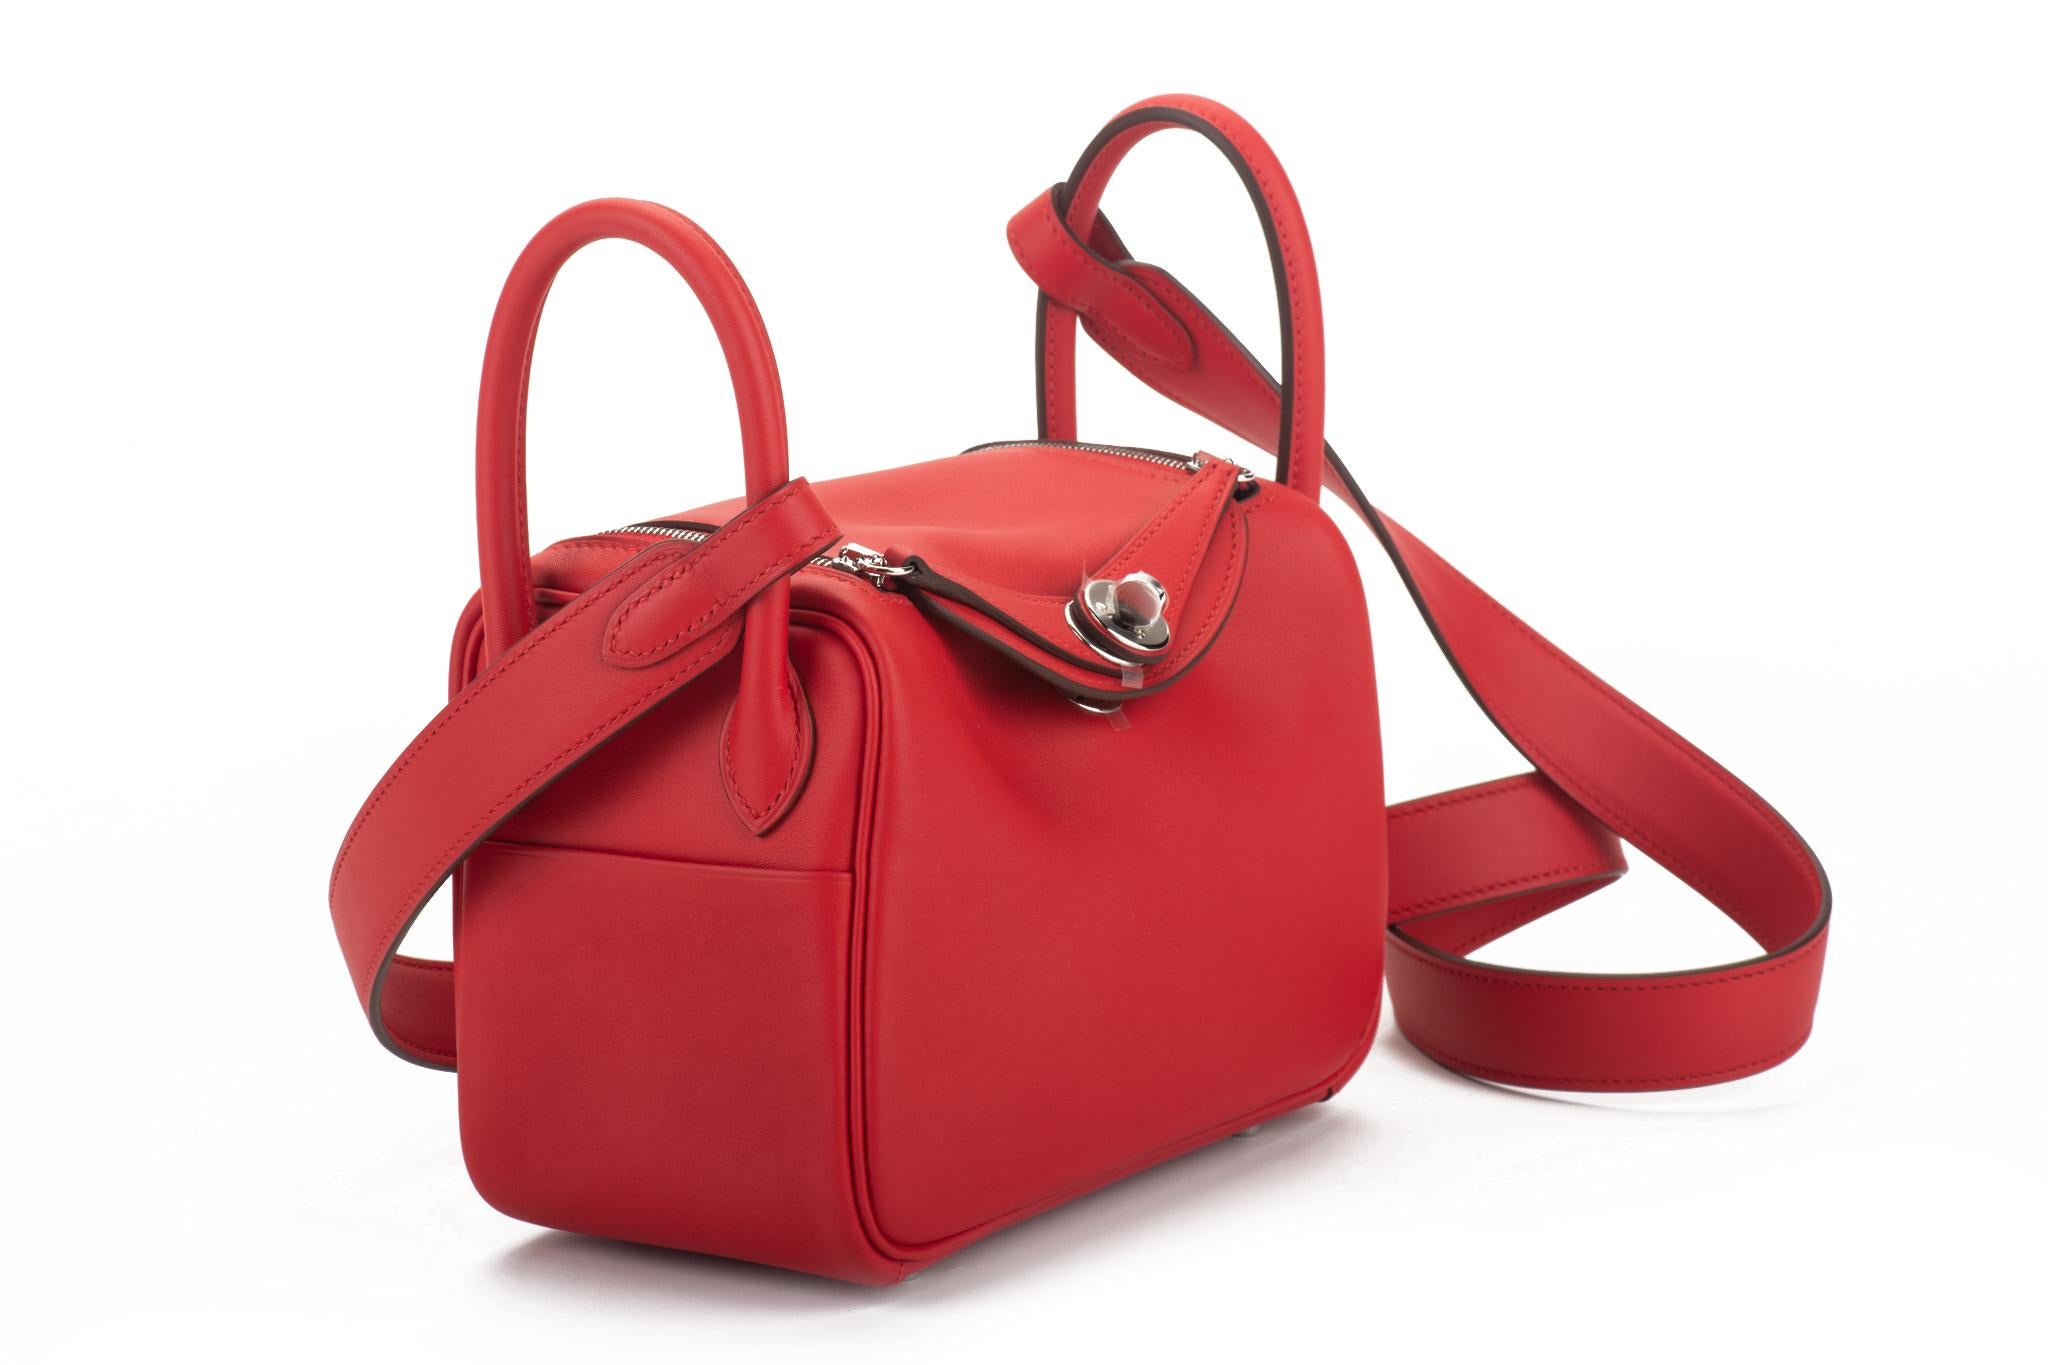 Hermes brand new in box mini lindy verso rouge de coeur et rouge pilent swift with palladium hardware. Date stamp Z, 2021. Coveted new size , can be worn in three ways, also cross body. Two interior pockets. Comes with dust cover and original box.